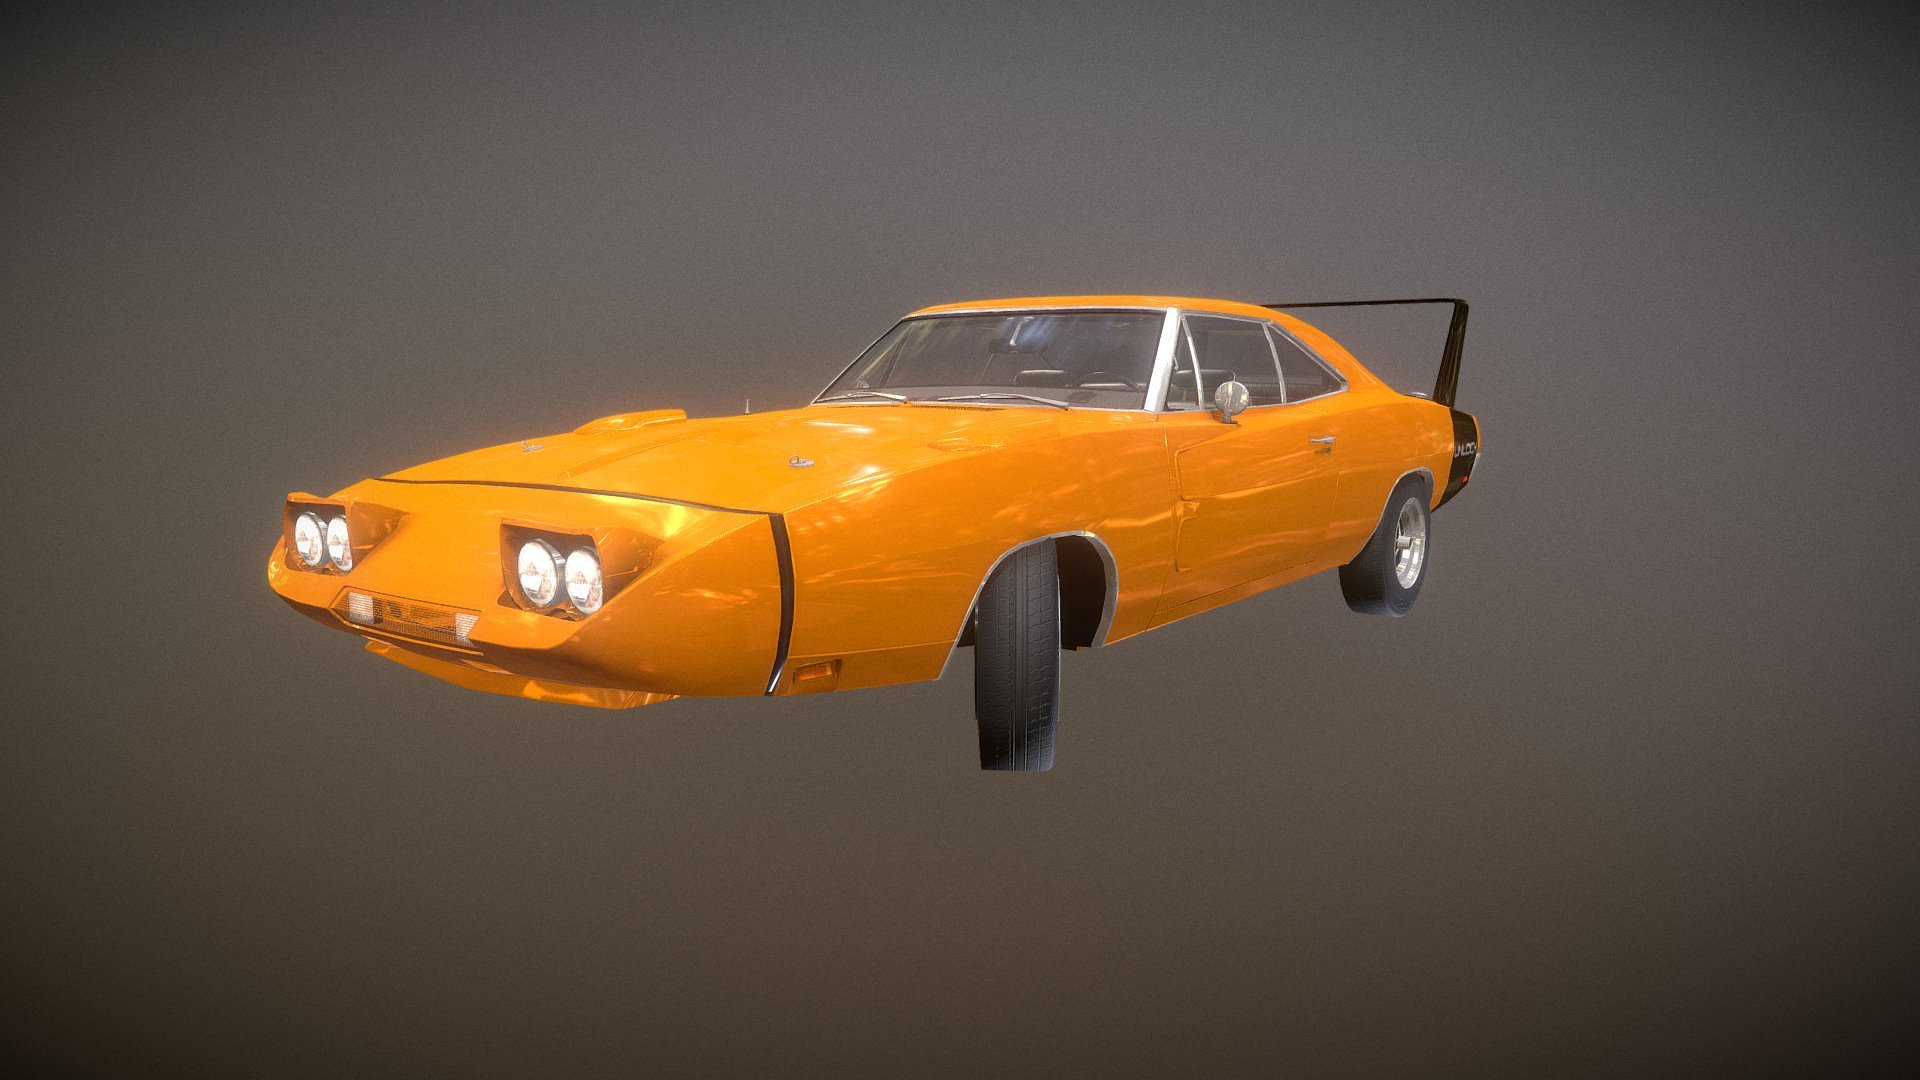 Subscribe and like my videos- Youtube.

https://www.youtube.com/channel/UCk6SVrjLxZofrigOtafpevA?view_as=subscriber

Classic muscle car model for game.
&lsquo; - Unlock Classic Car 05 - 3D model by UnlockGameAssets 3d model